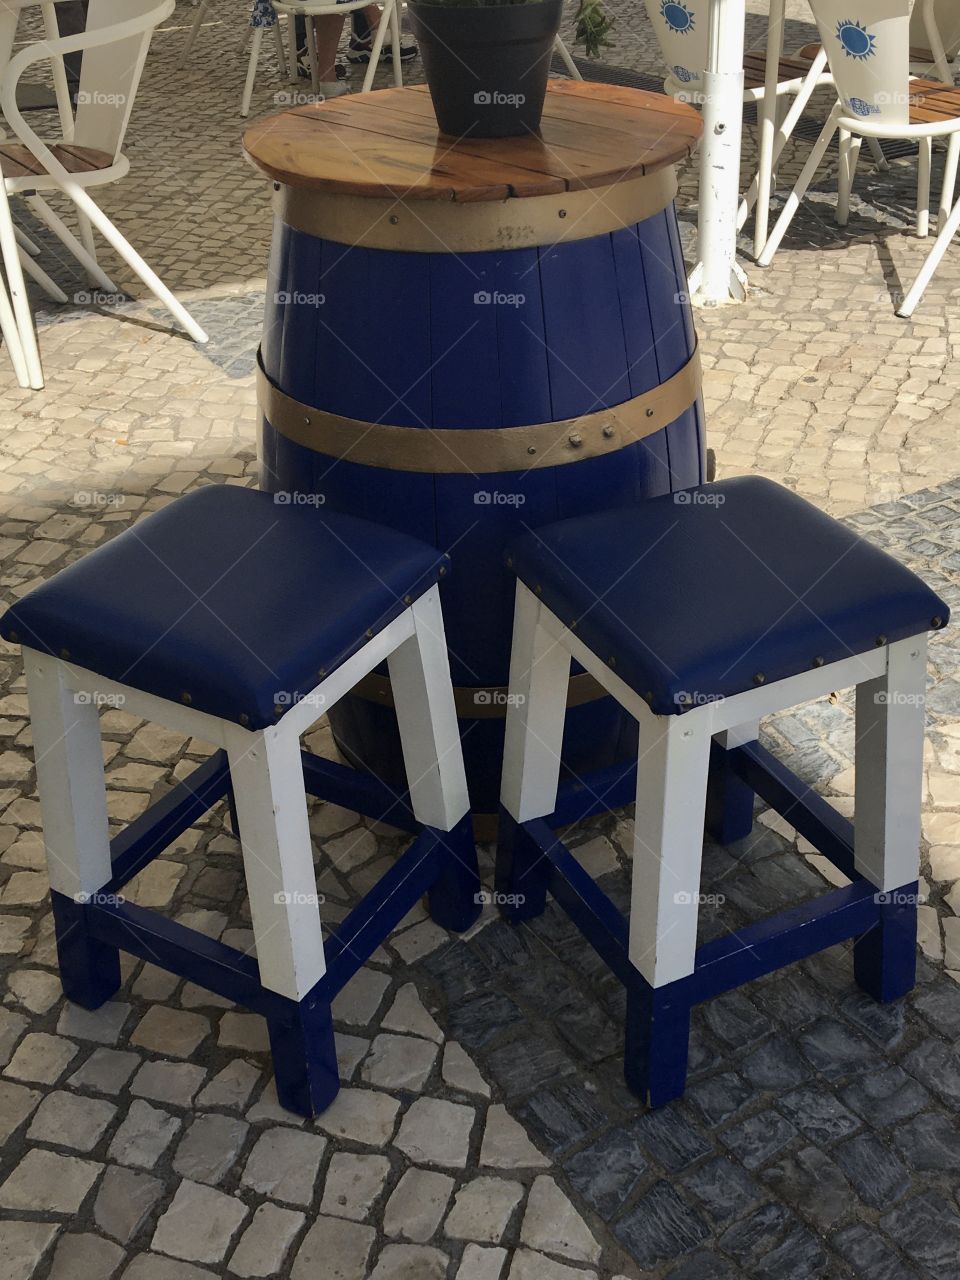 One blue barrel and 2 stools on traditional pavement